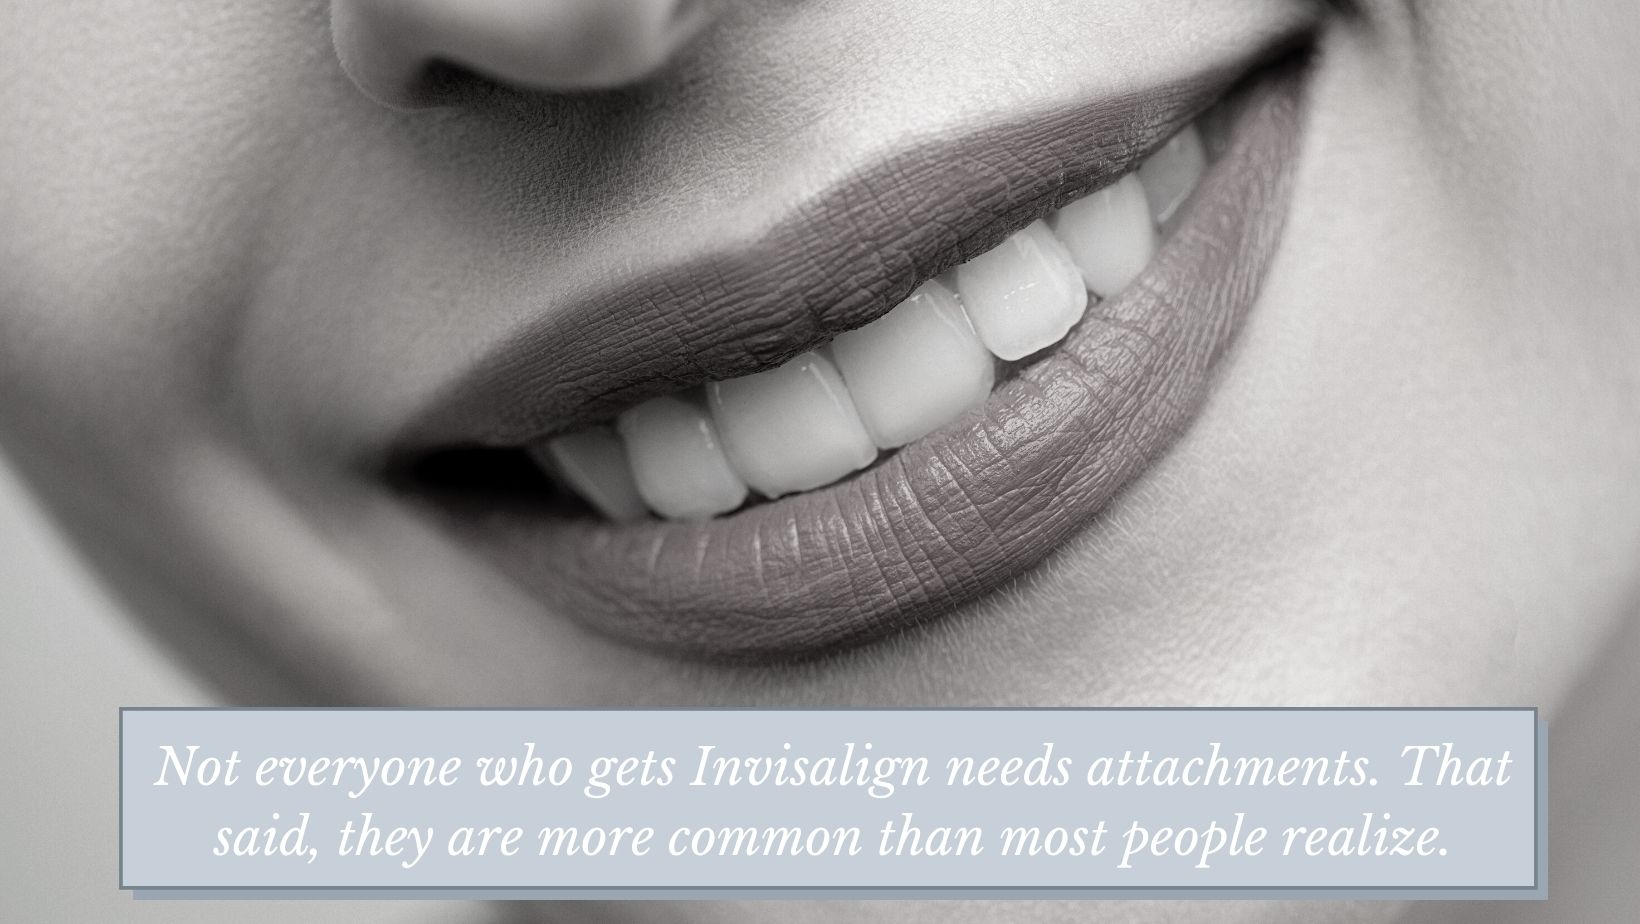 Woman's smile and quote "Not everyone who gets Invisalign needs attachments."